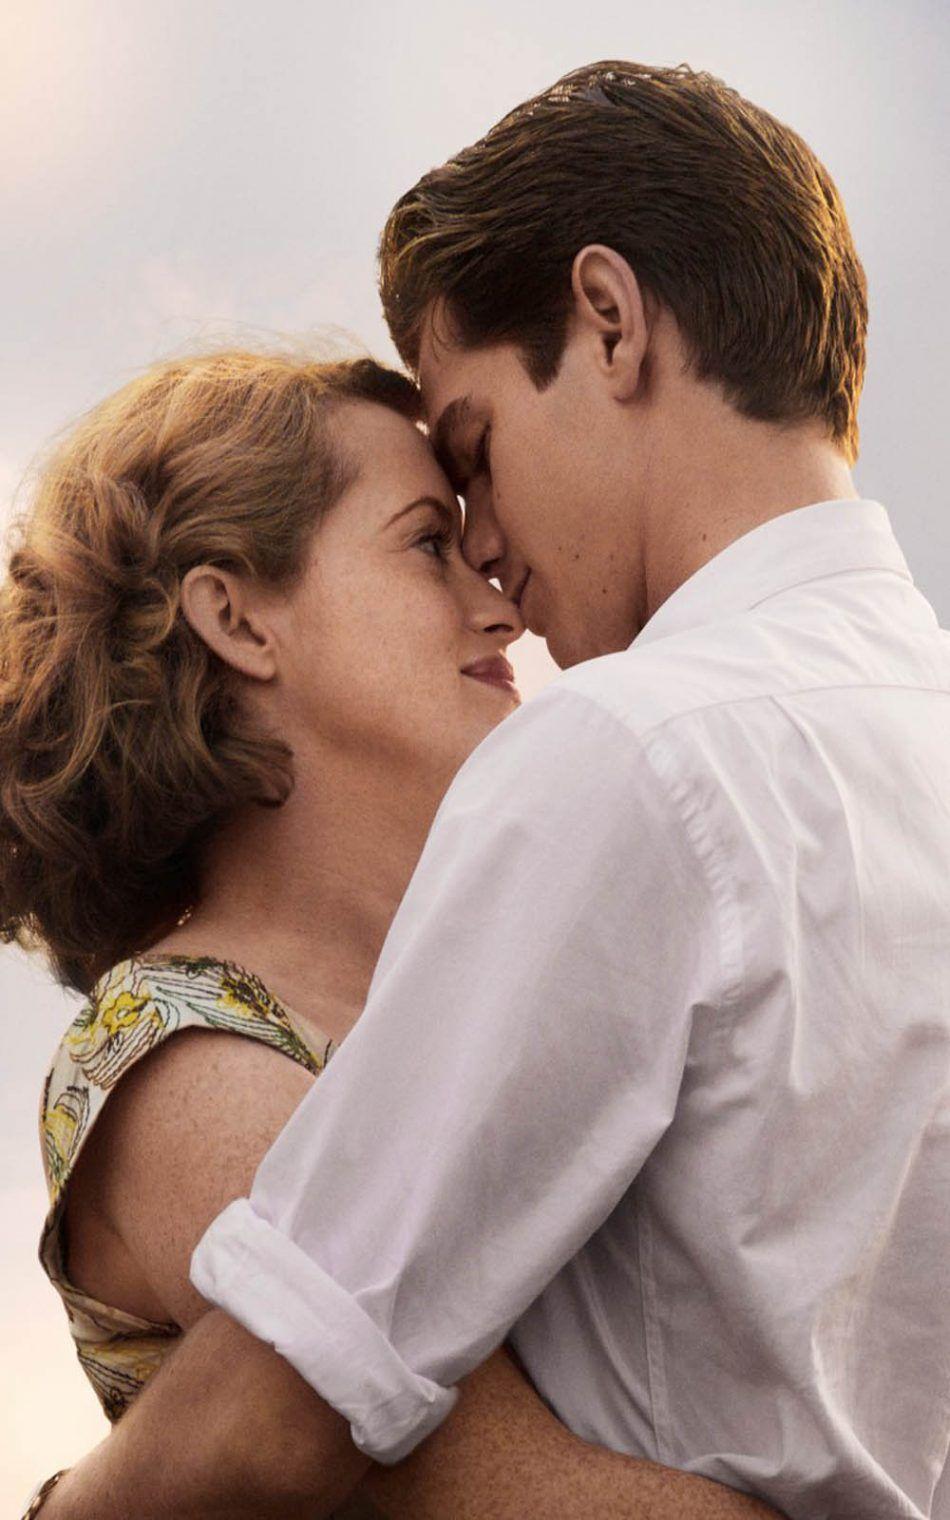 Andrew Garfield And Claire Foy In Breathe Free 100% Pure